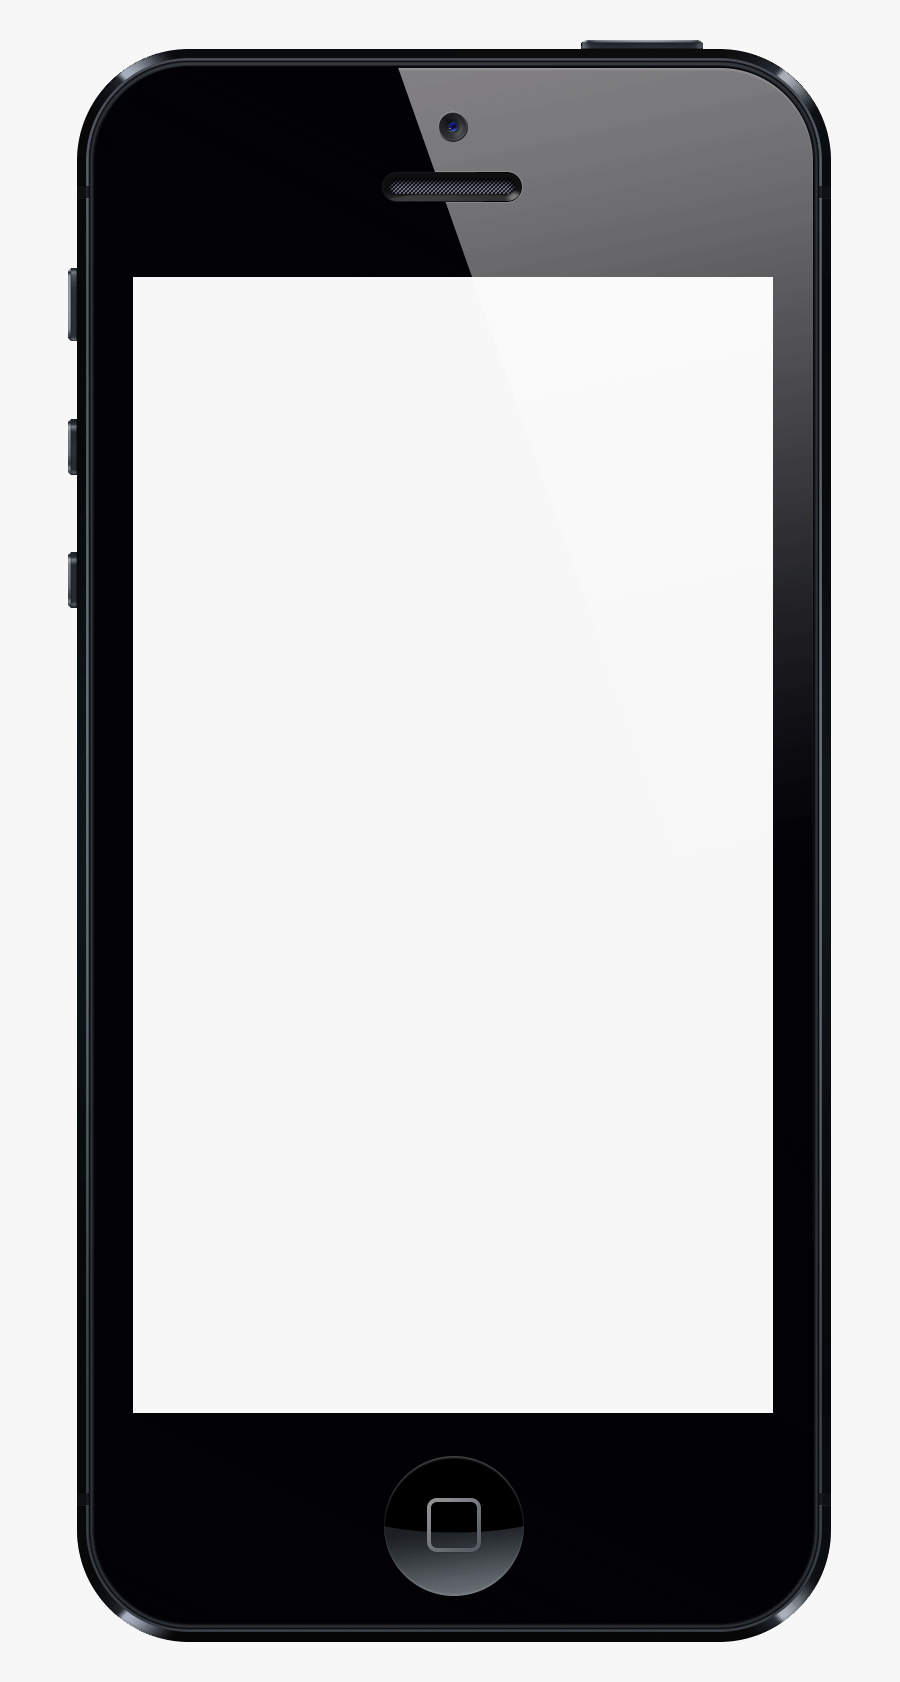 Smartphone Frame Png - Iphone 6 Clipart Black And White, Transparent Clipart